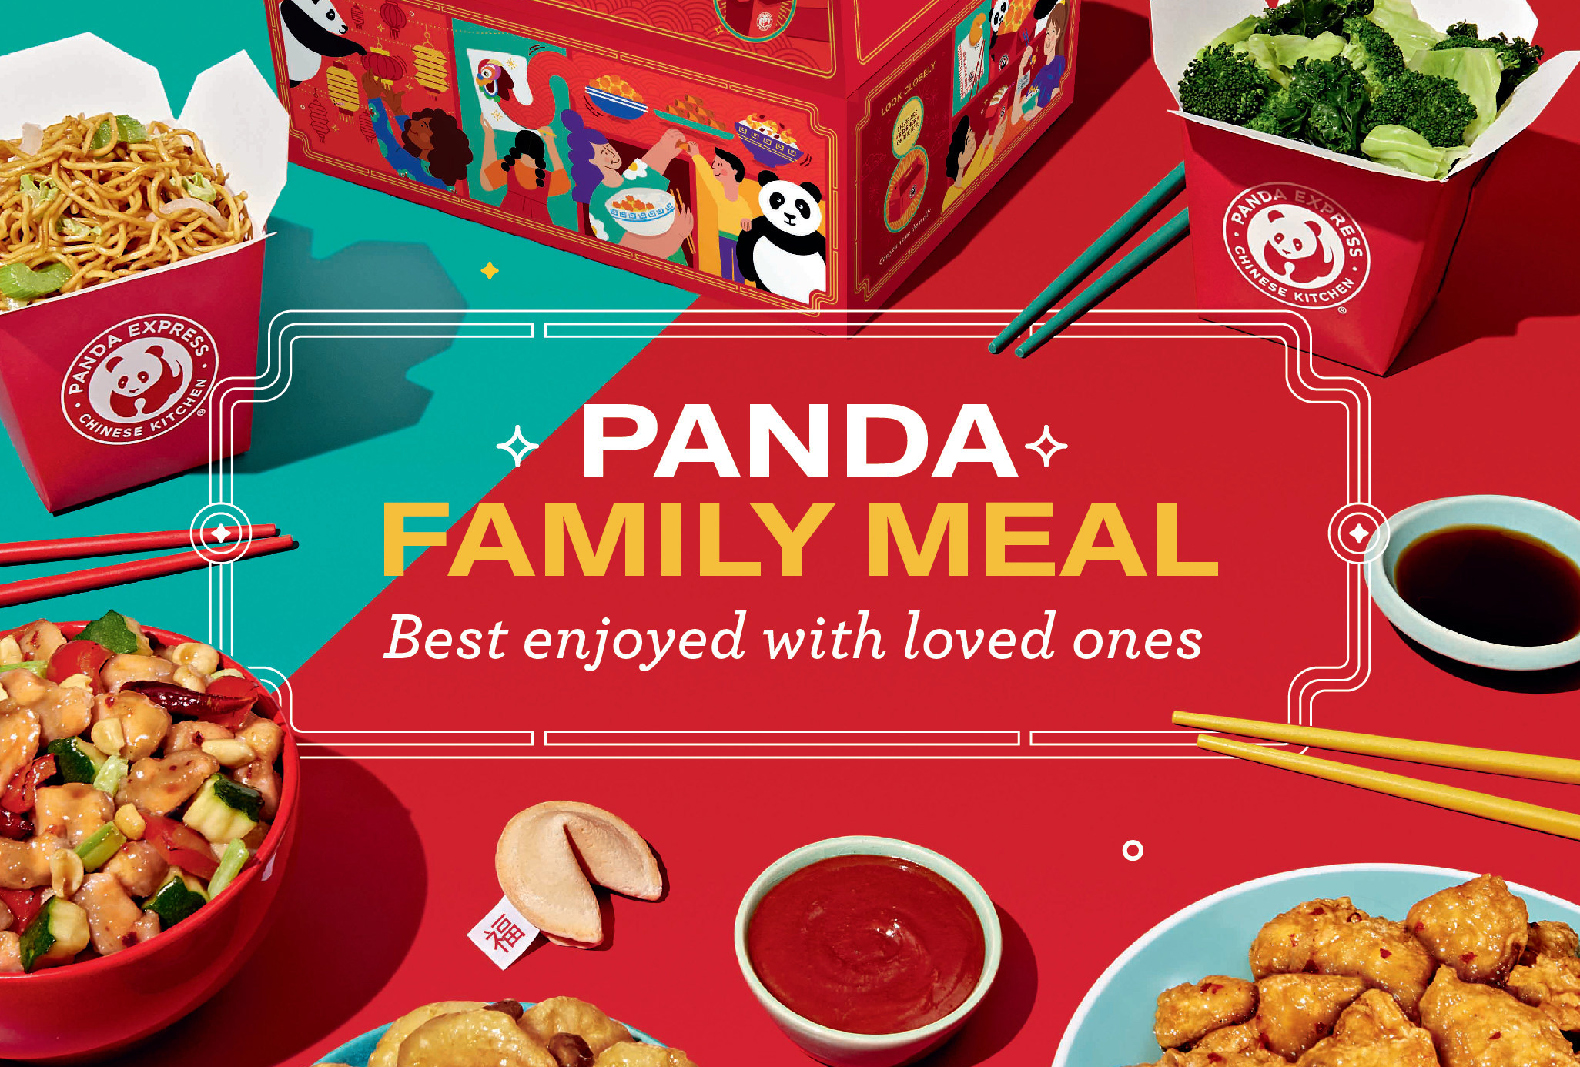 Panda Express launches new online gaming experience | Nation's Restaurant  News